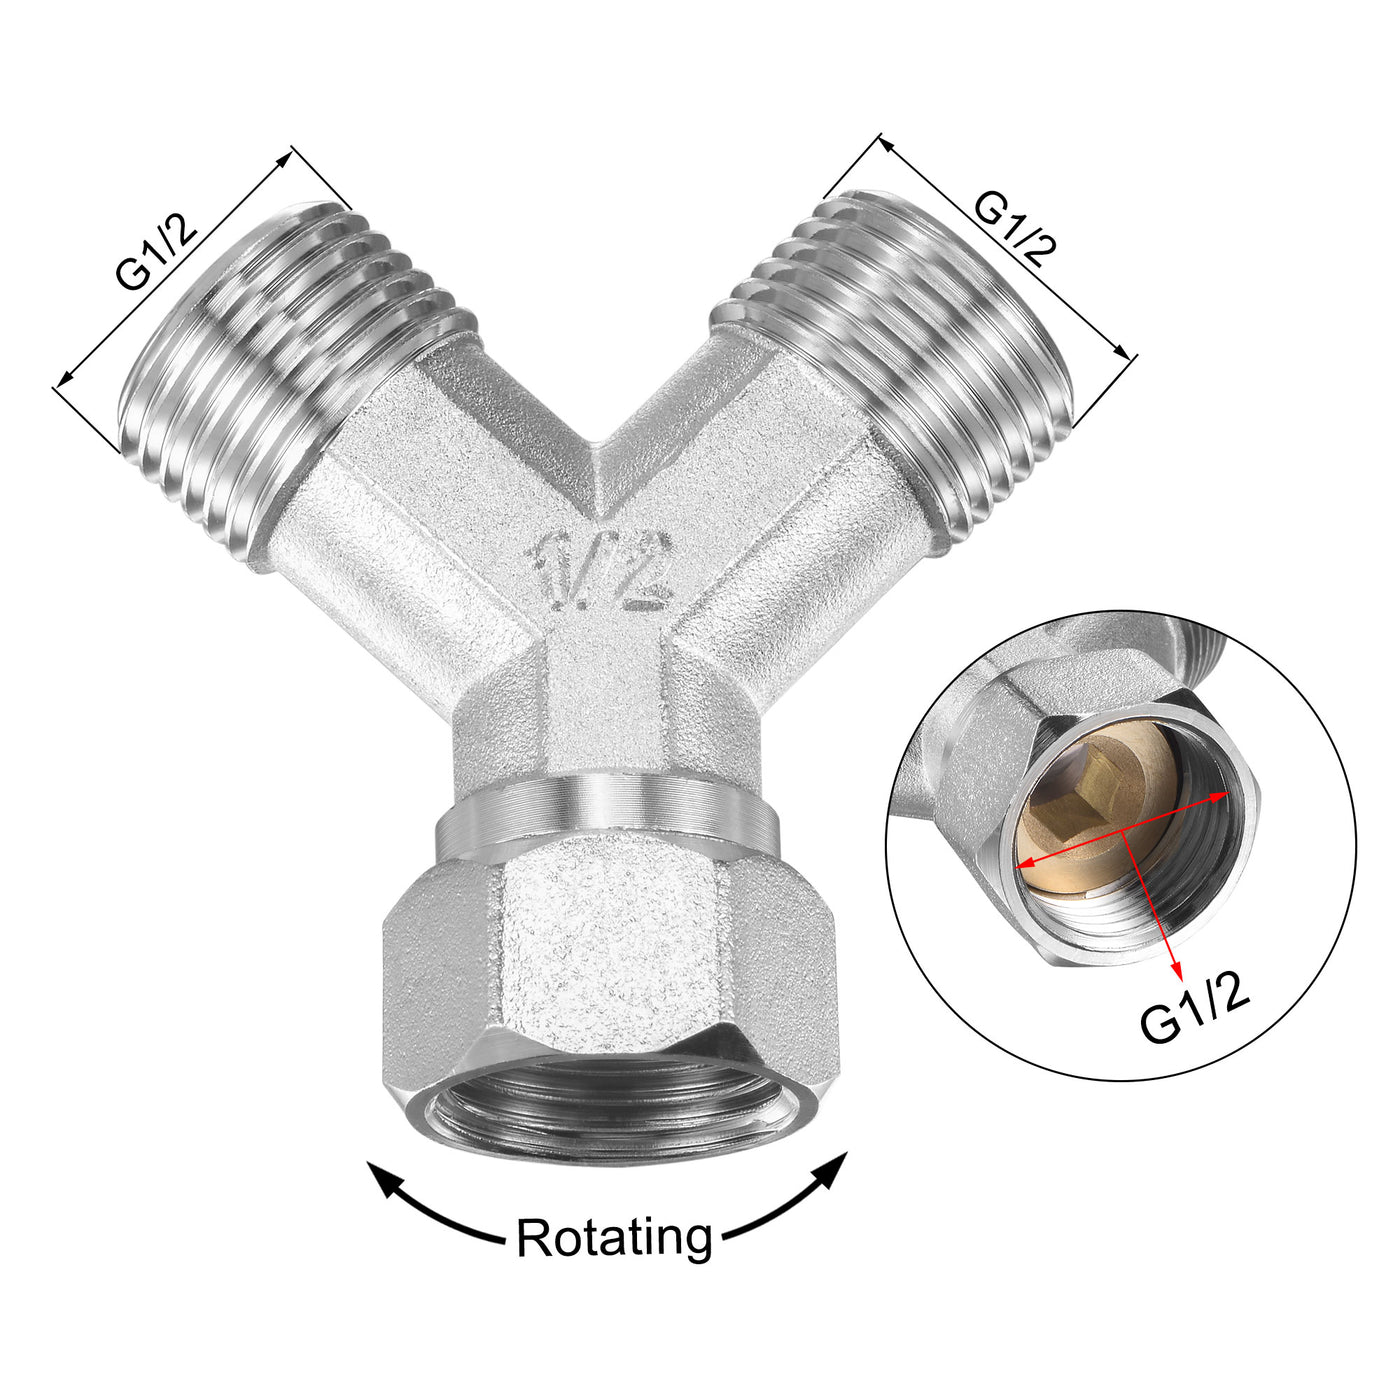 uxcell Uxcell Pipe Fitting G1/2 1 Female to 2 Male Thread Y Shape 3 Ways Wye Hose Connector Adapter, Nickel-Plated Copper